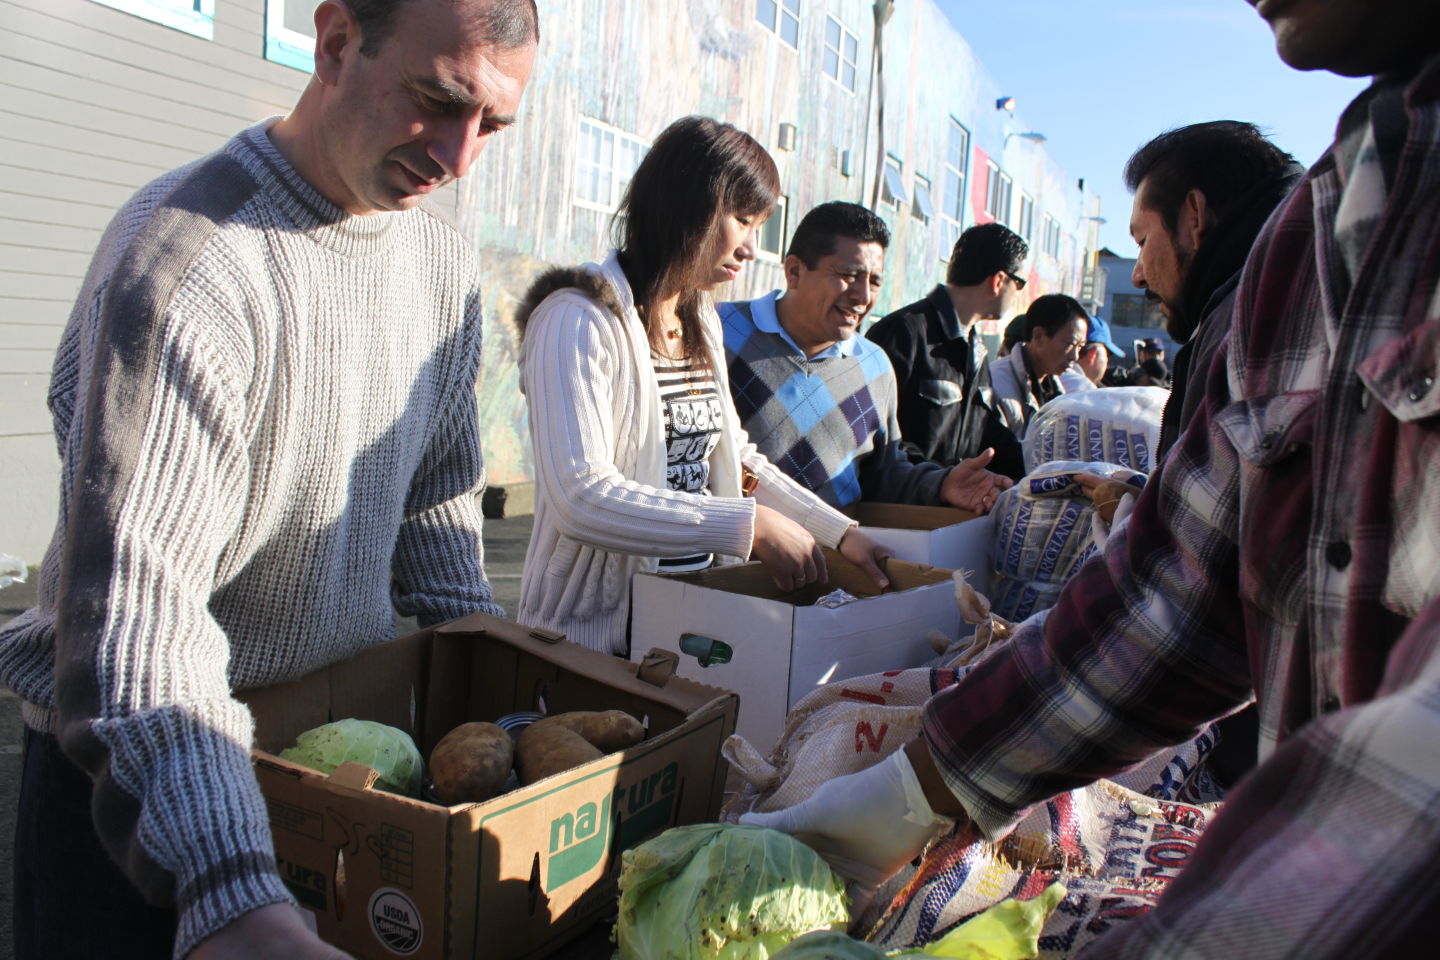 Volunteers help distribute food to participants at one of the SF-Marin Food Bank’s pantries